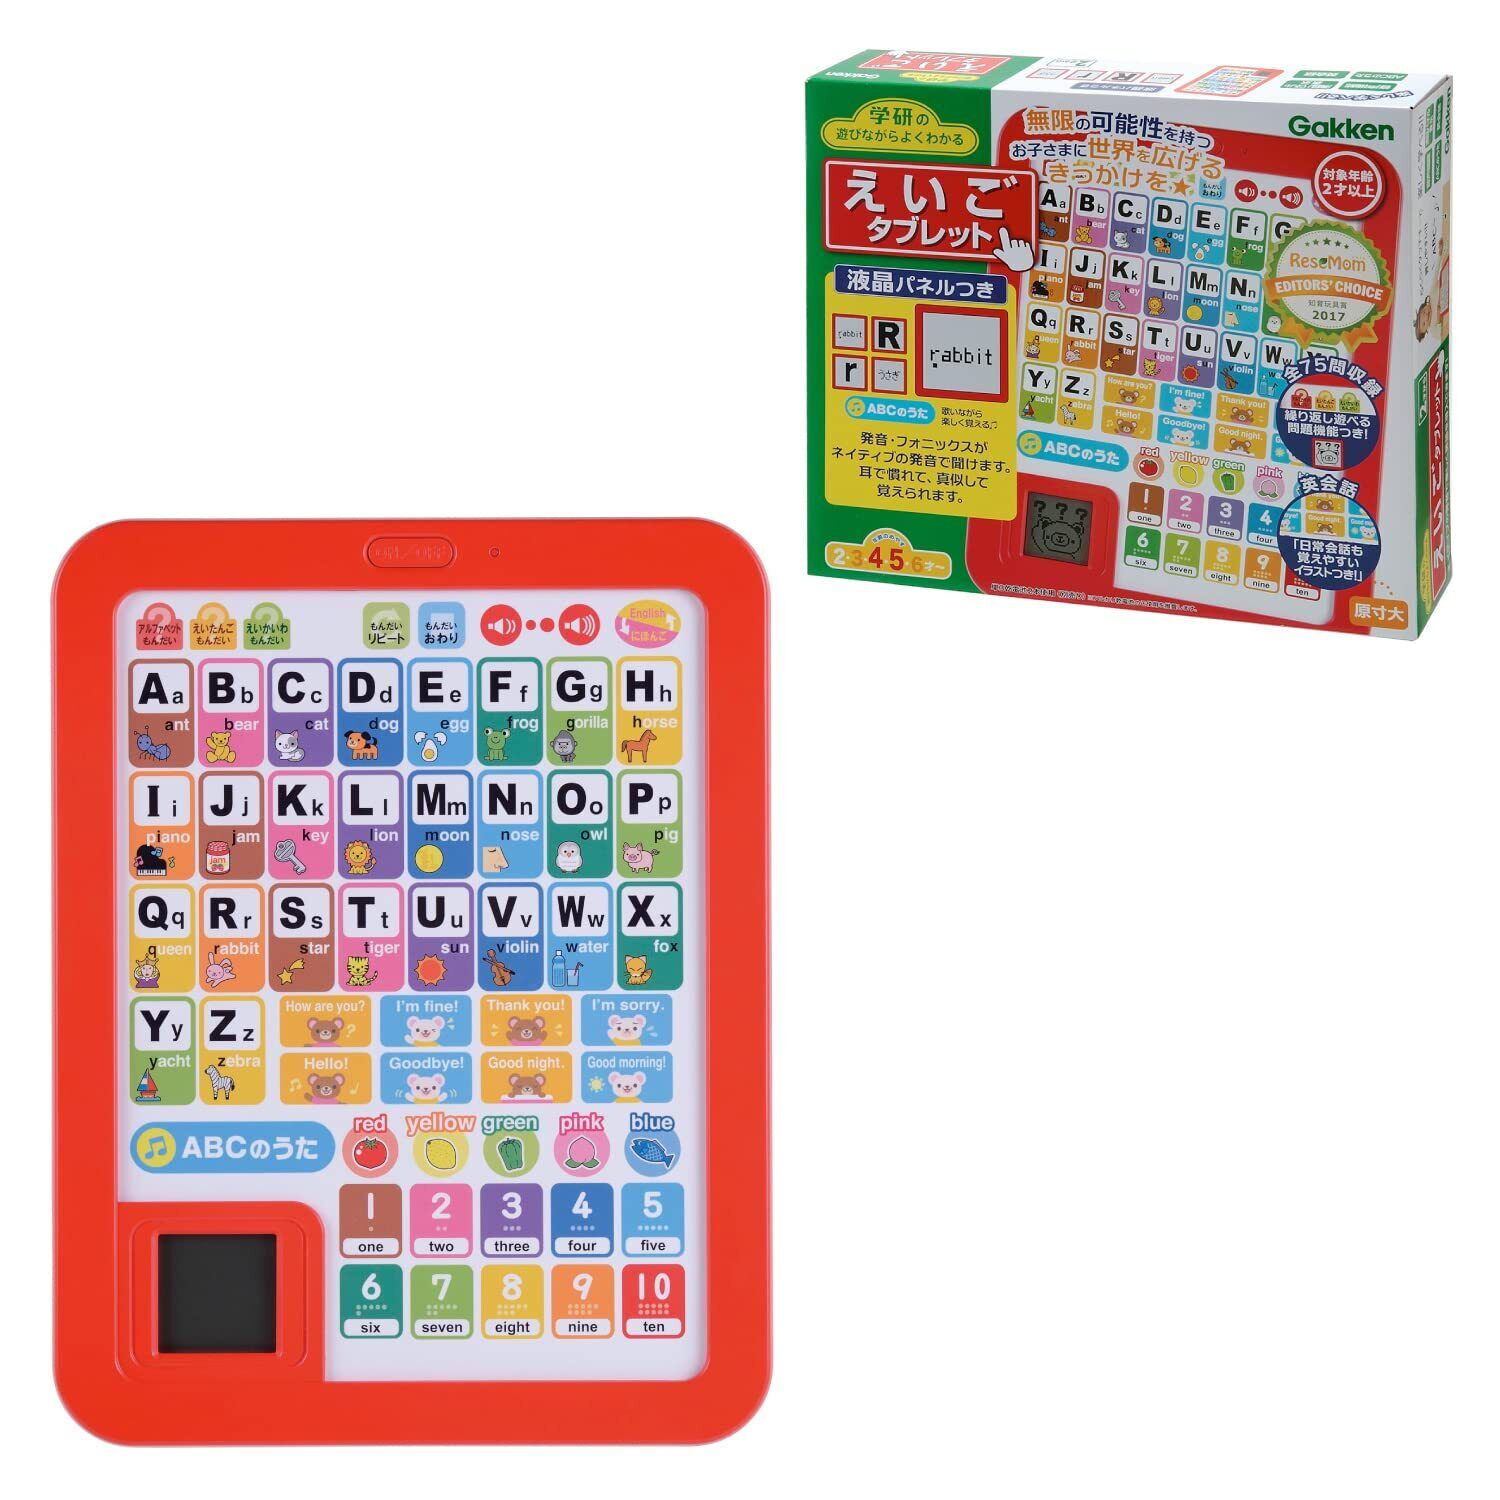 Gakken Sta:Ful Easy to understand while playing Gakken English tablet (target ag